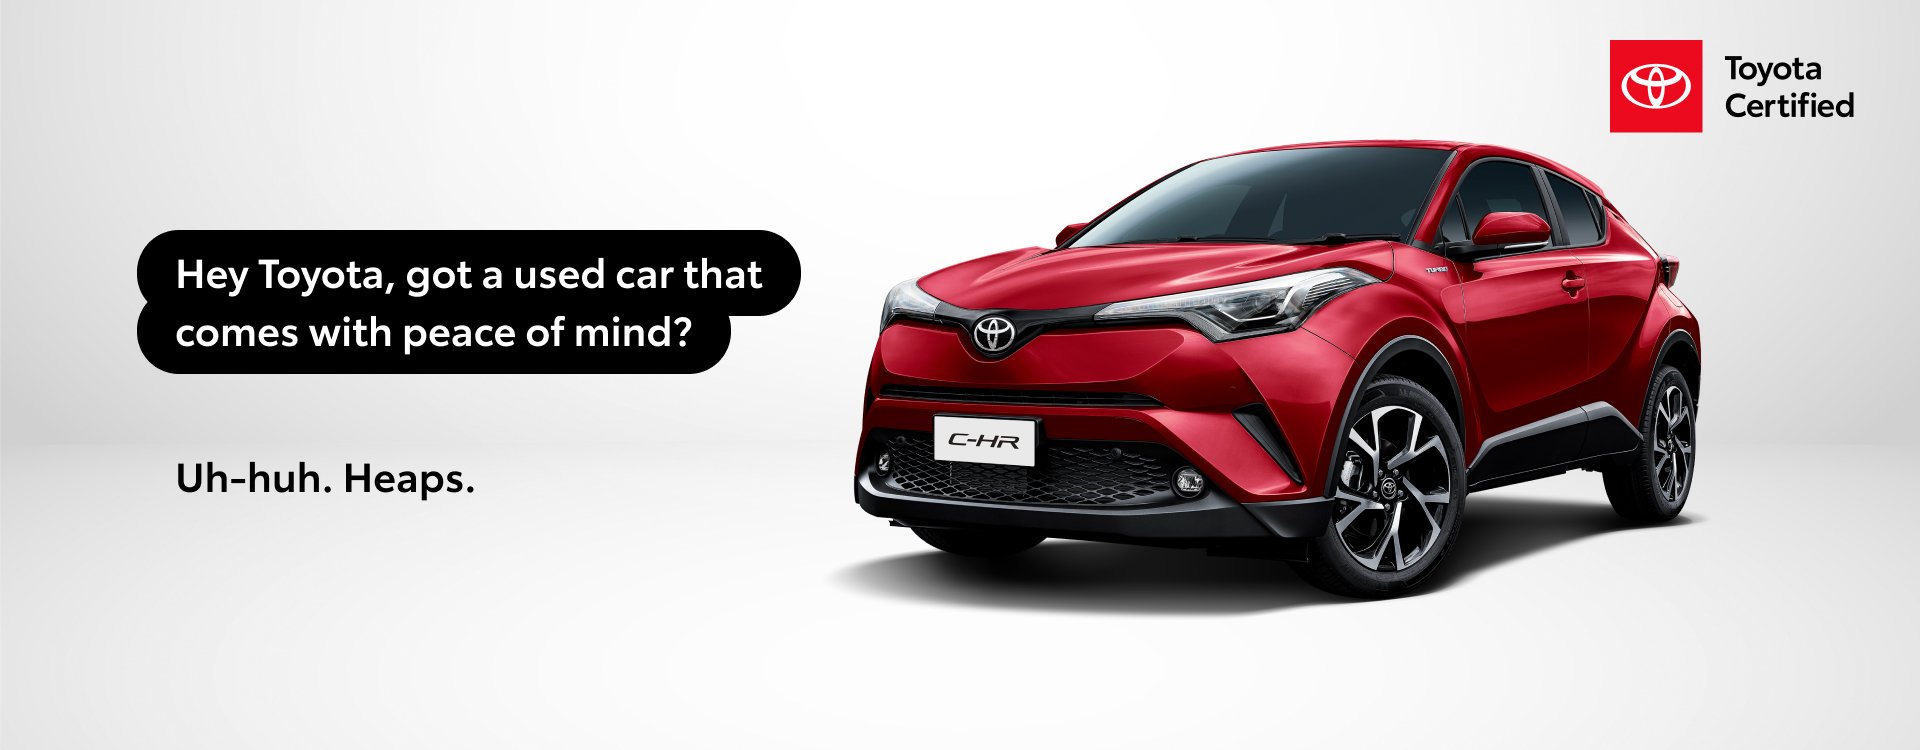  Hey Toyota, got a used car that comes with peace of mind? 